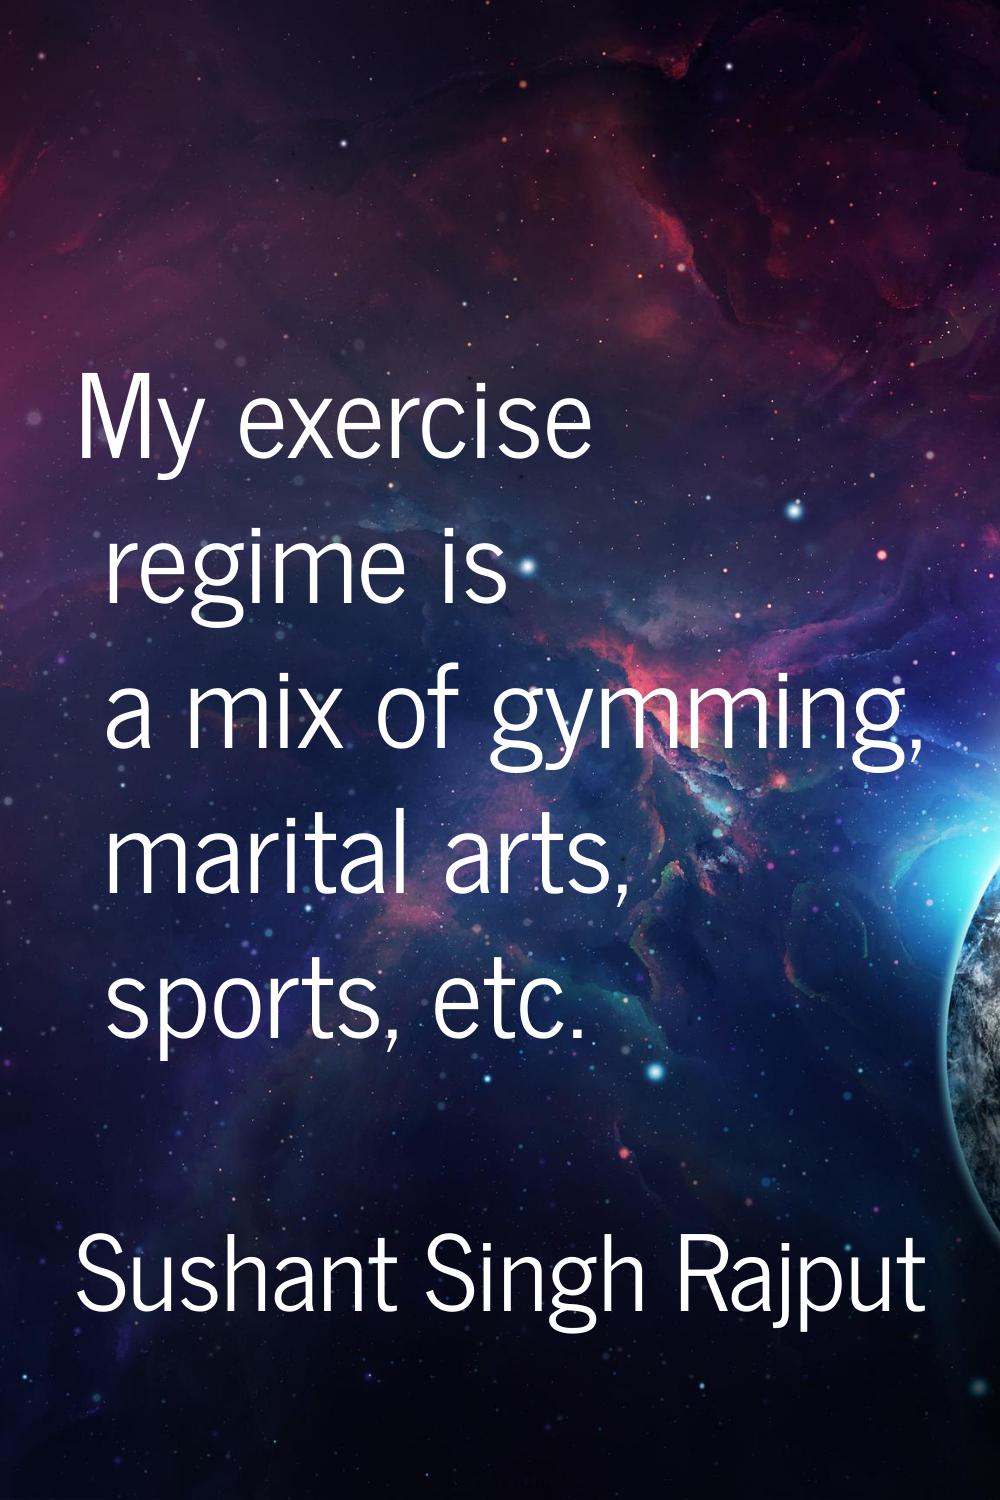 My exercise regime is a mix of gymming, marital arts, sports, etc.